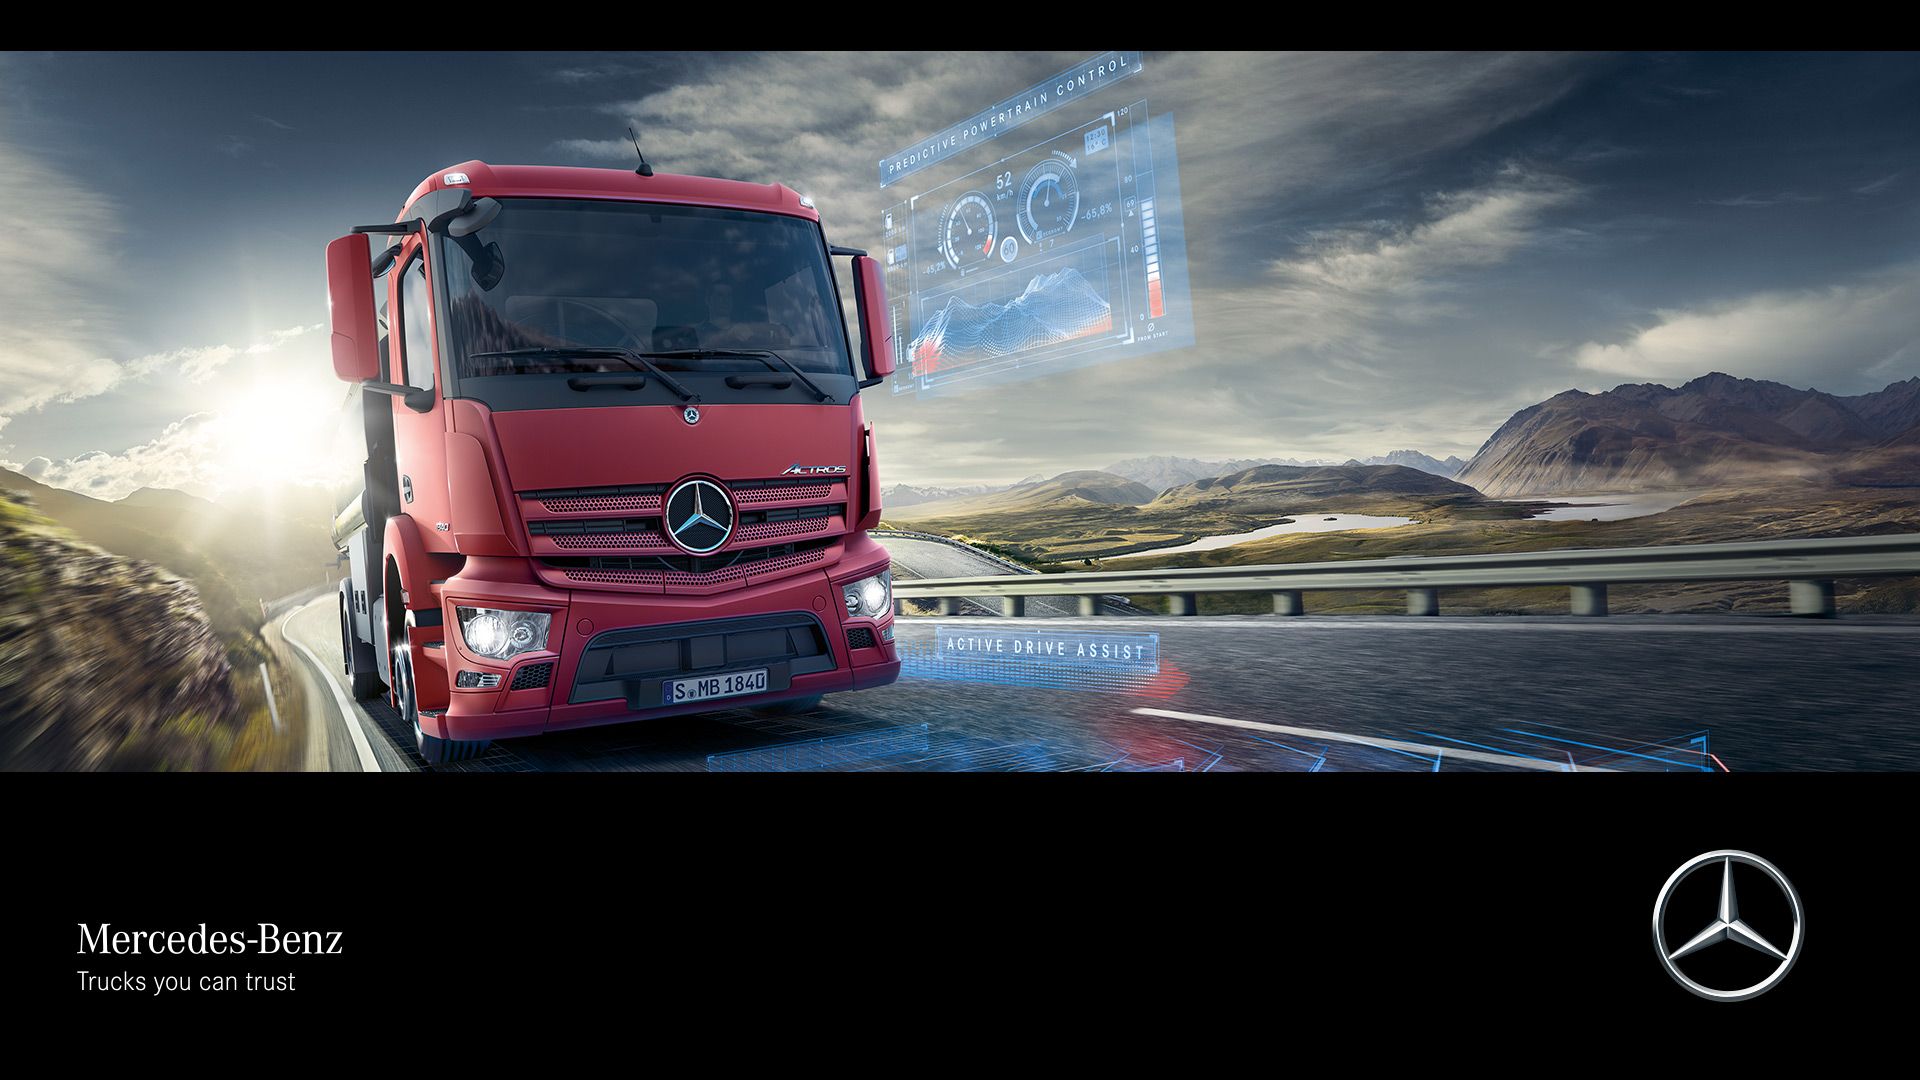 The new Actros: Multimedia